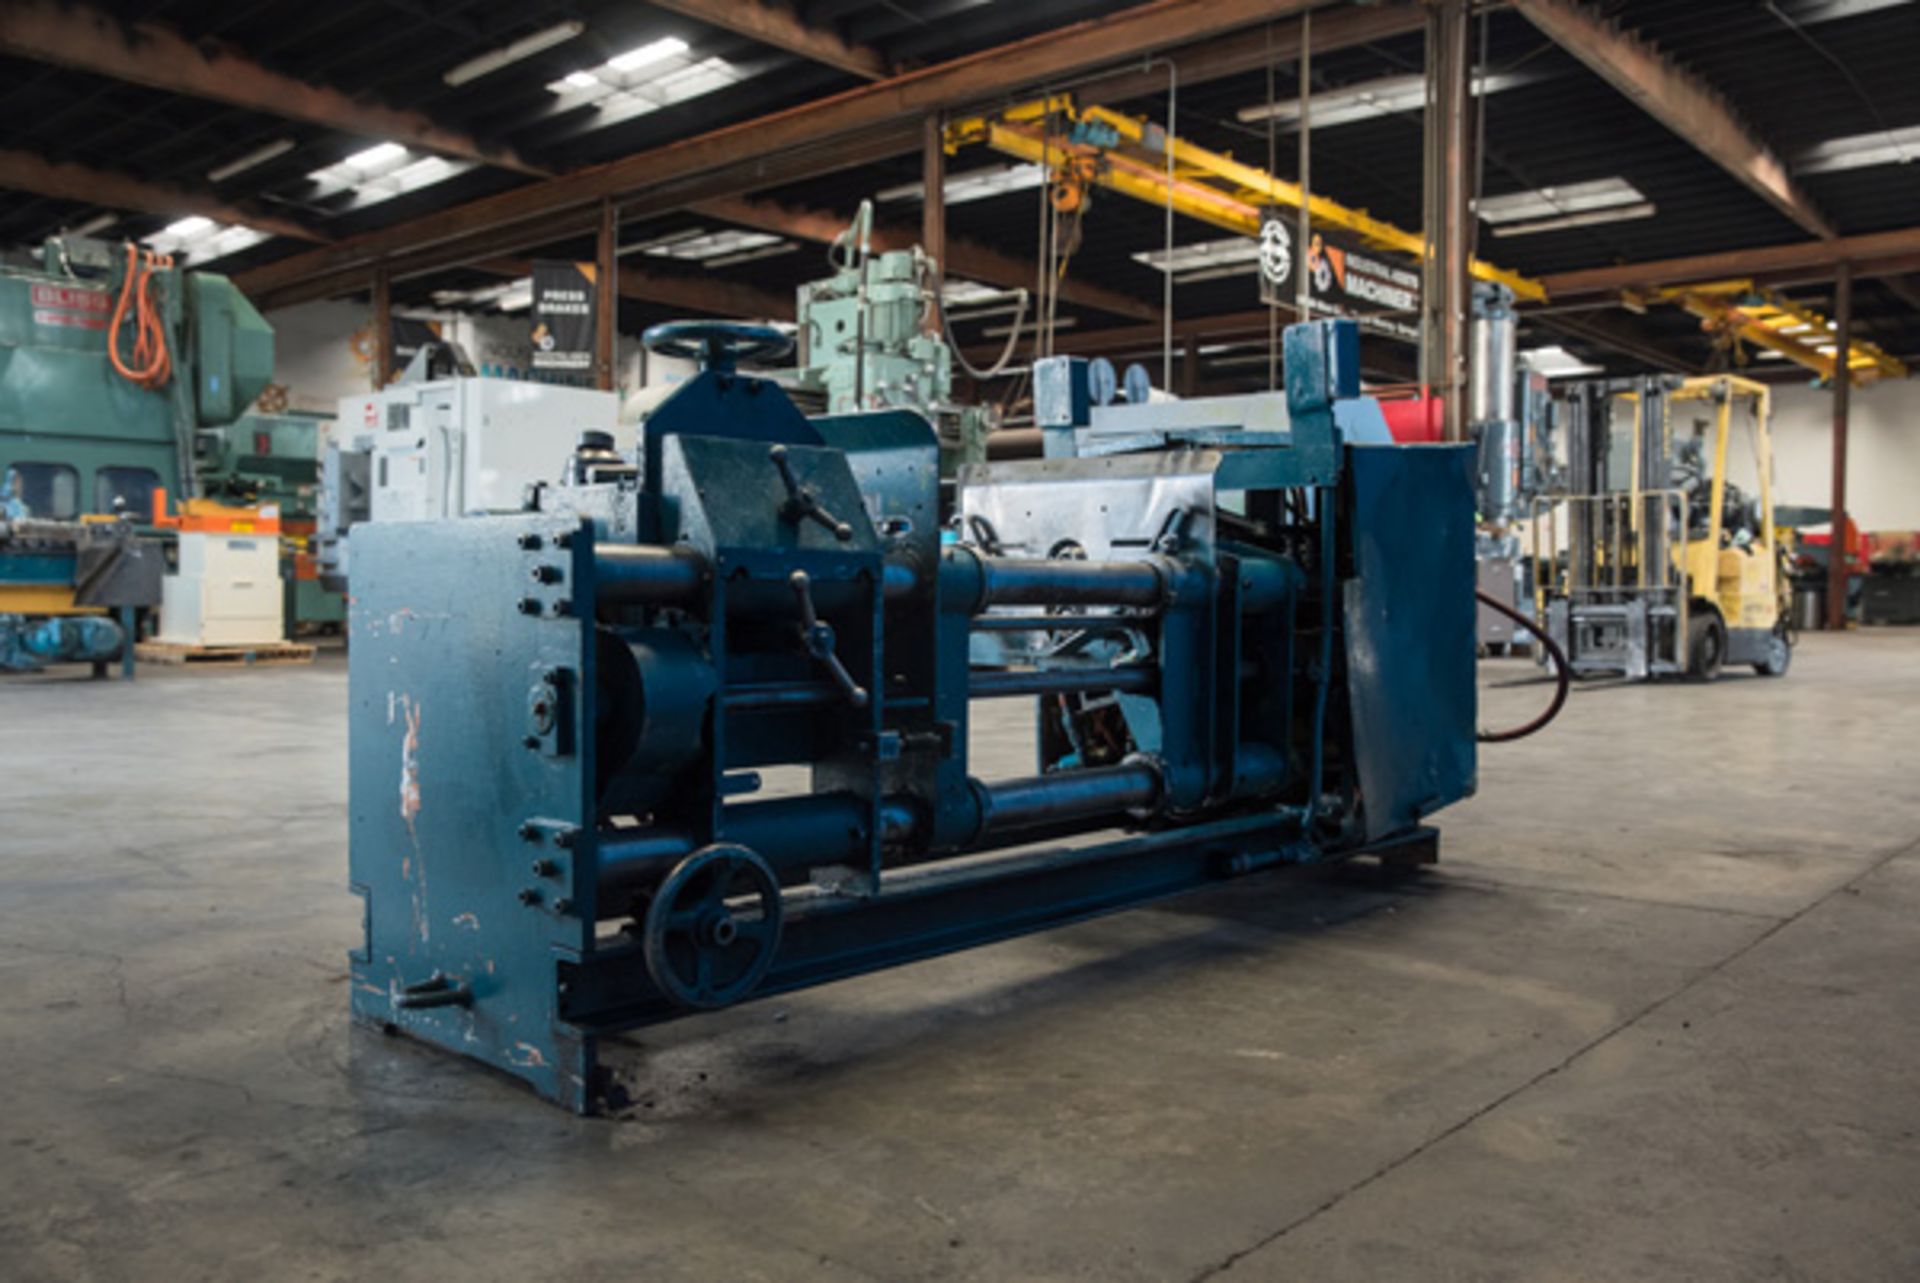 Dual End Can Bead Flanging Machine, Located In: Huntington Park, CA - 7181 - Image 4 of 14